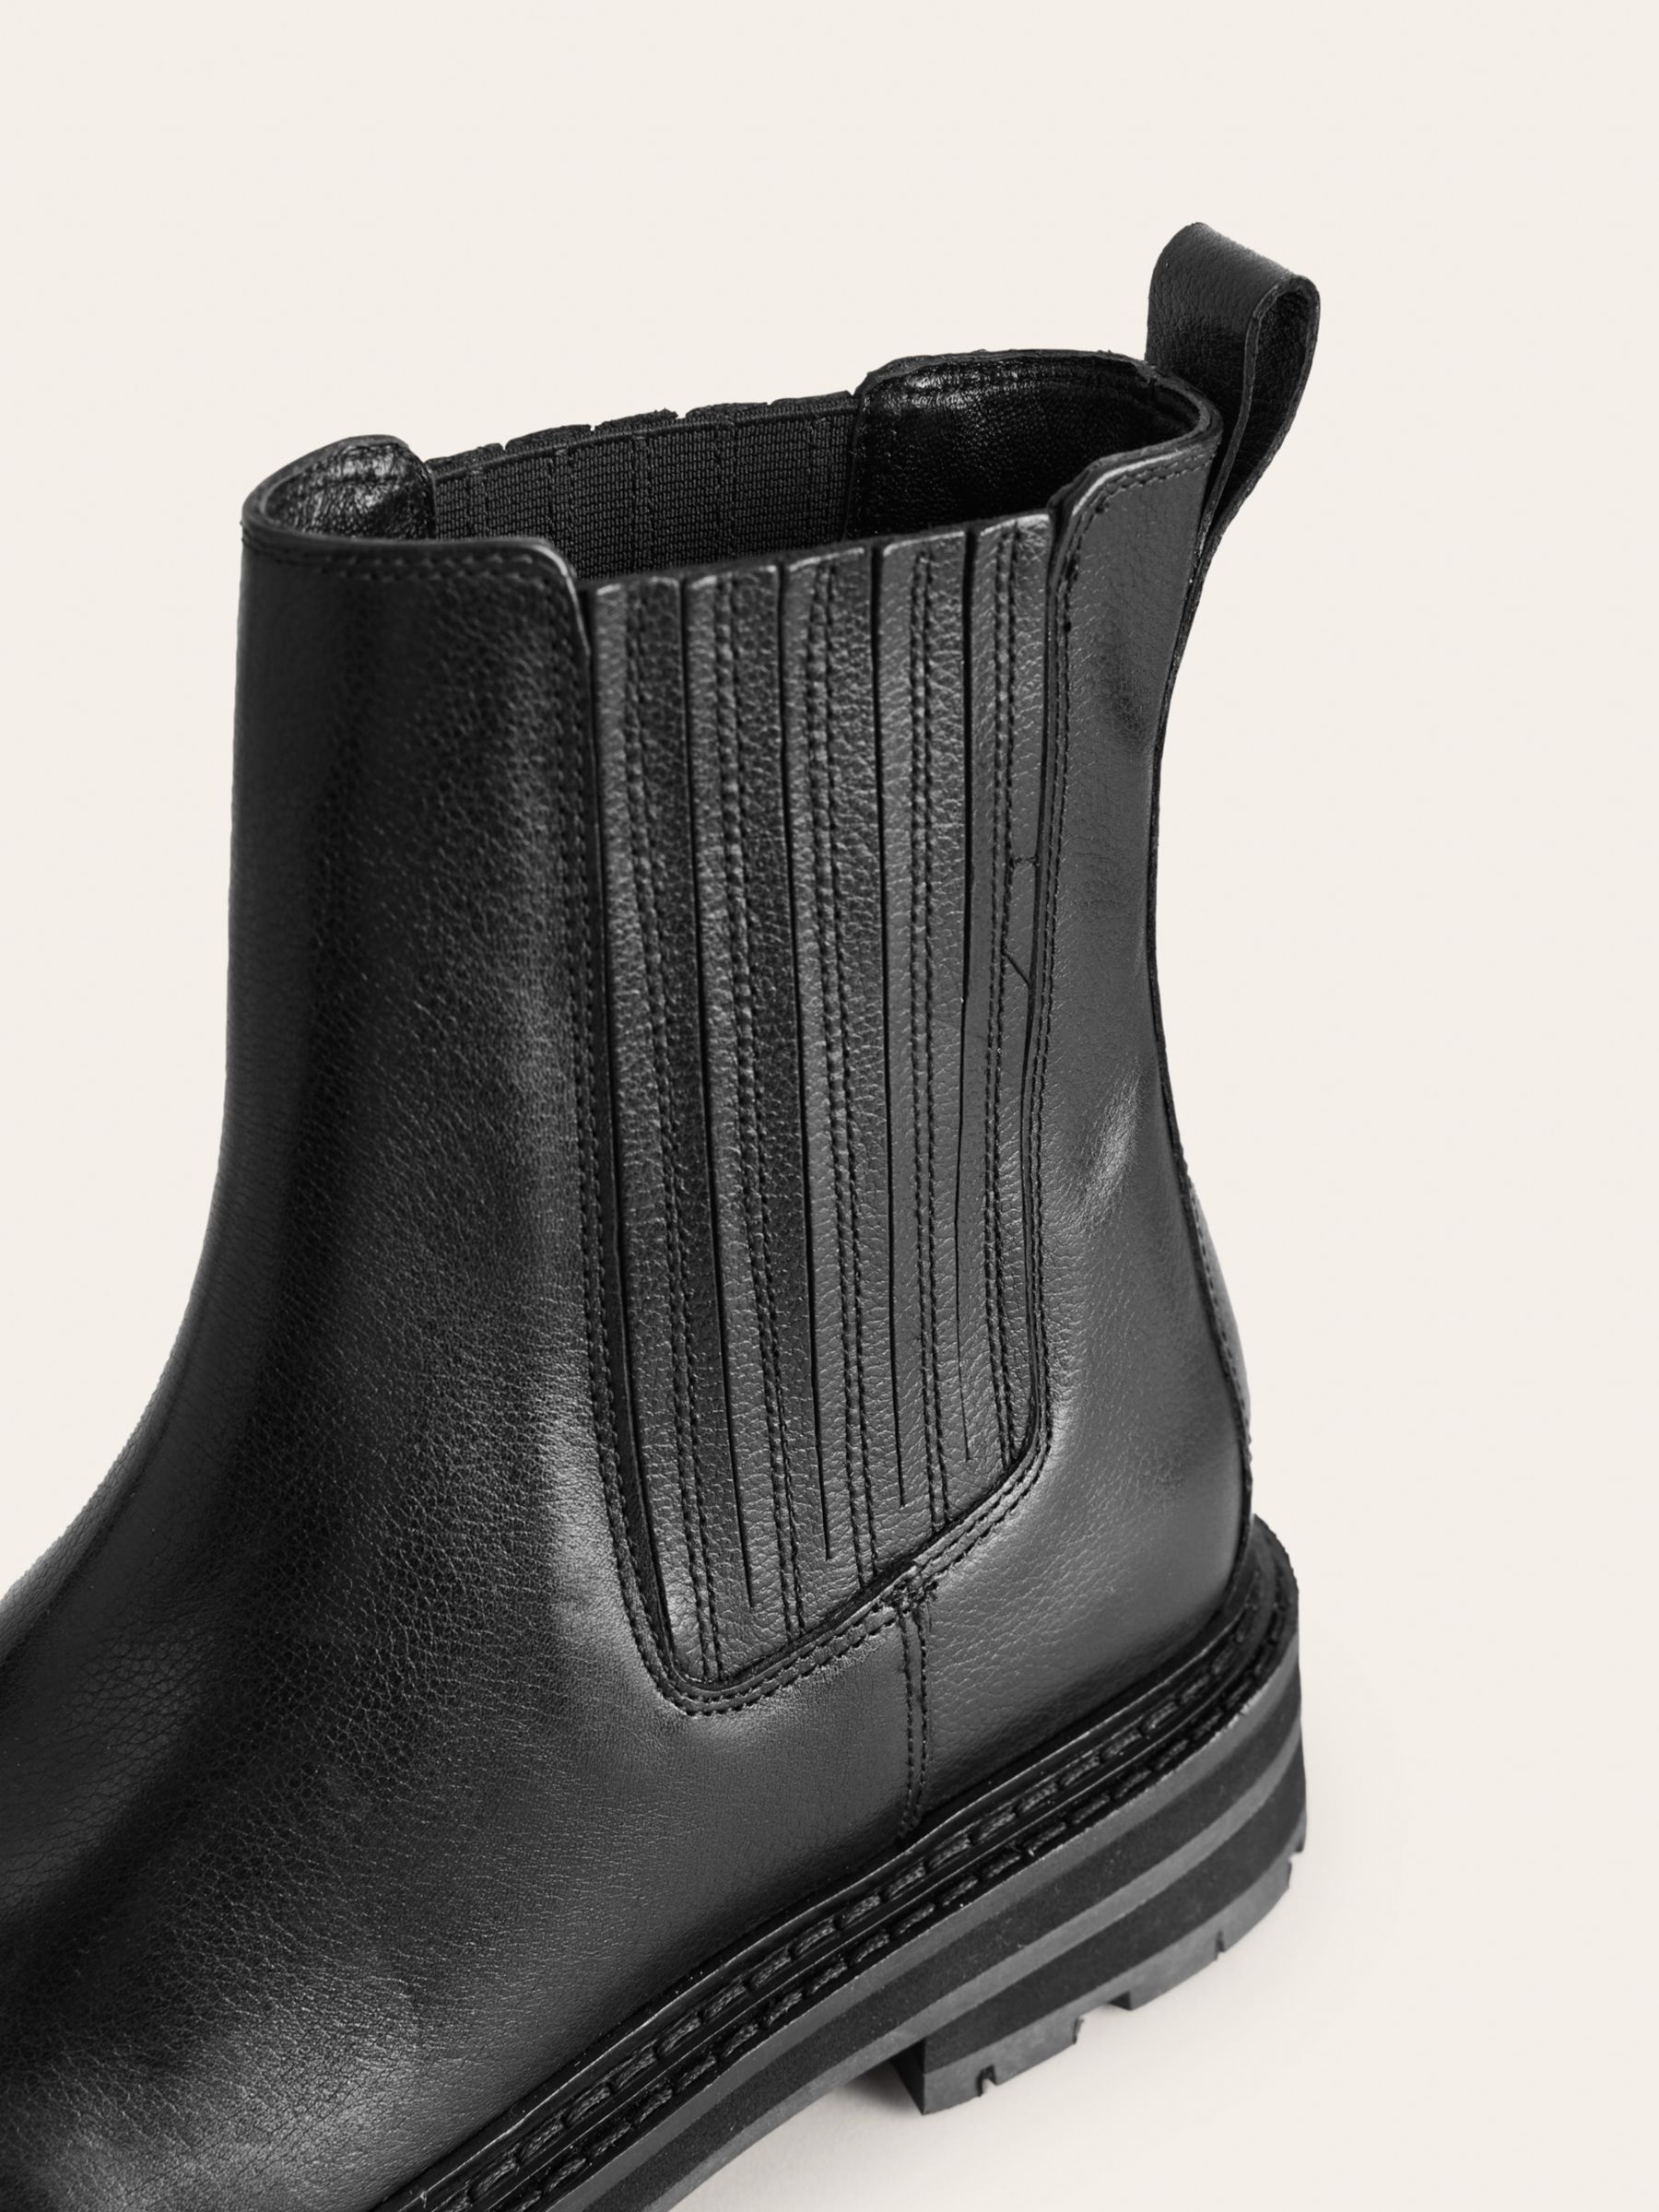 Boden Sadie Leather Chelsea Boots, Black at John Lewis & Partners